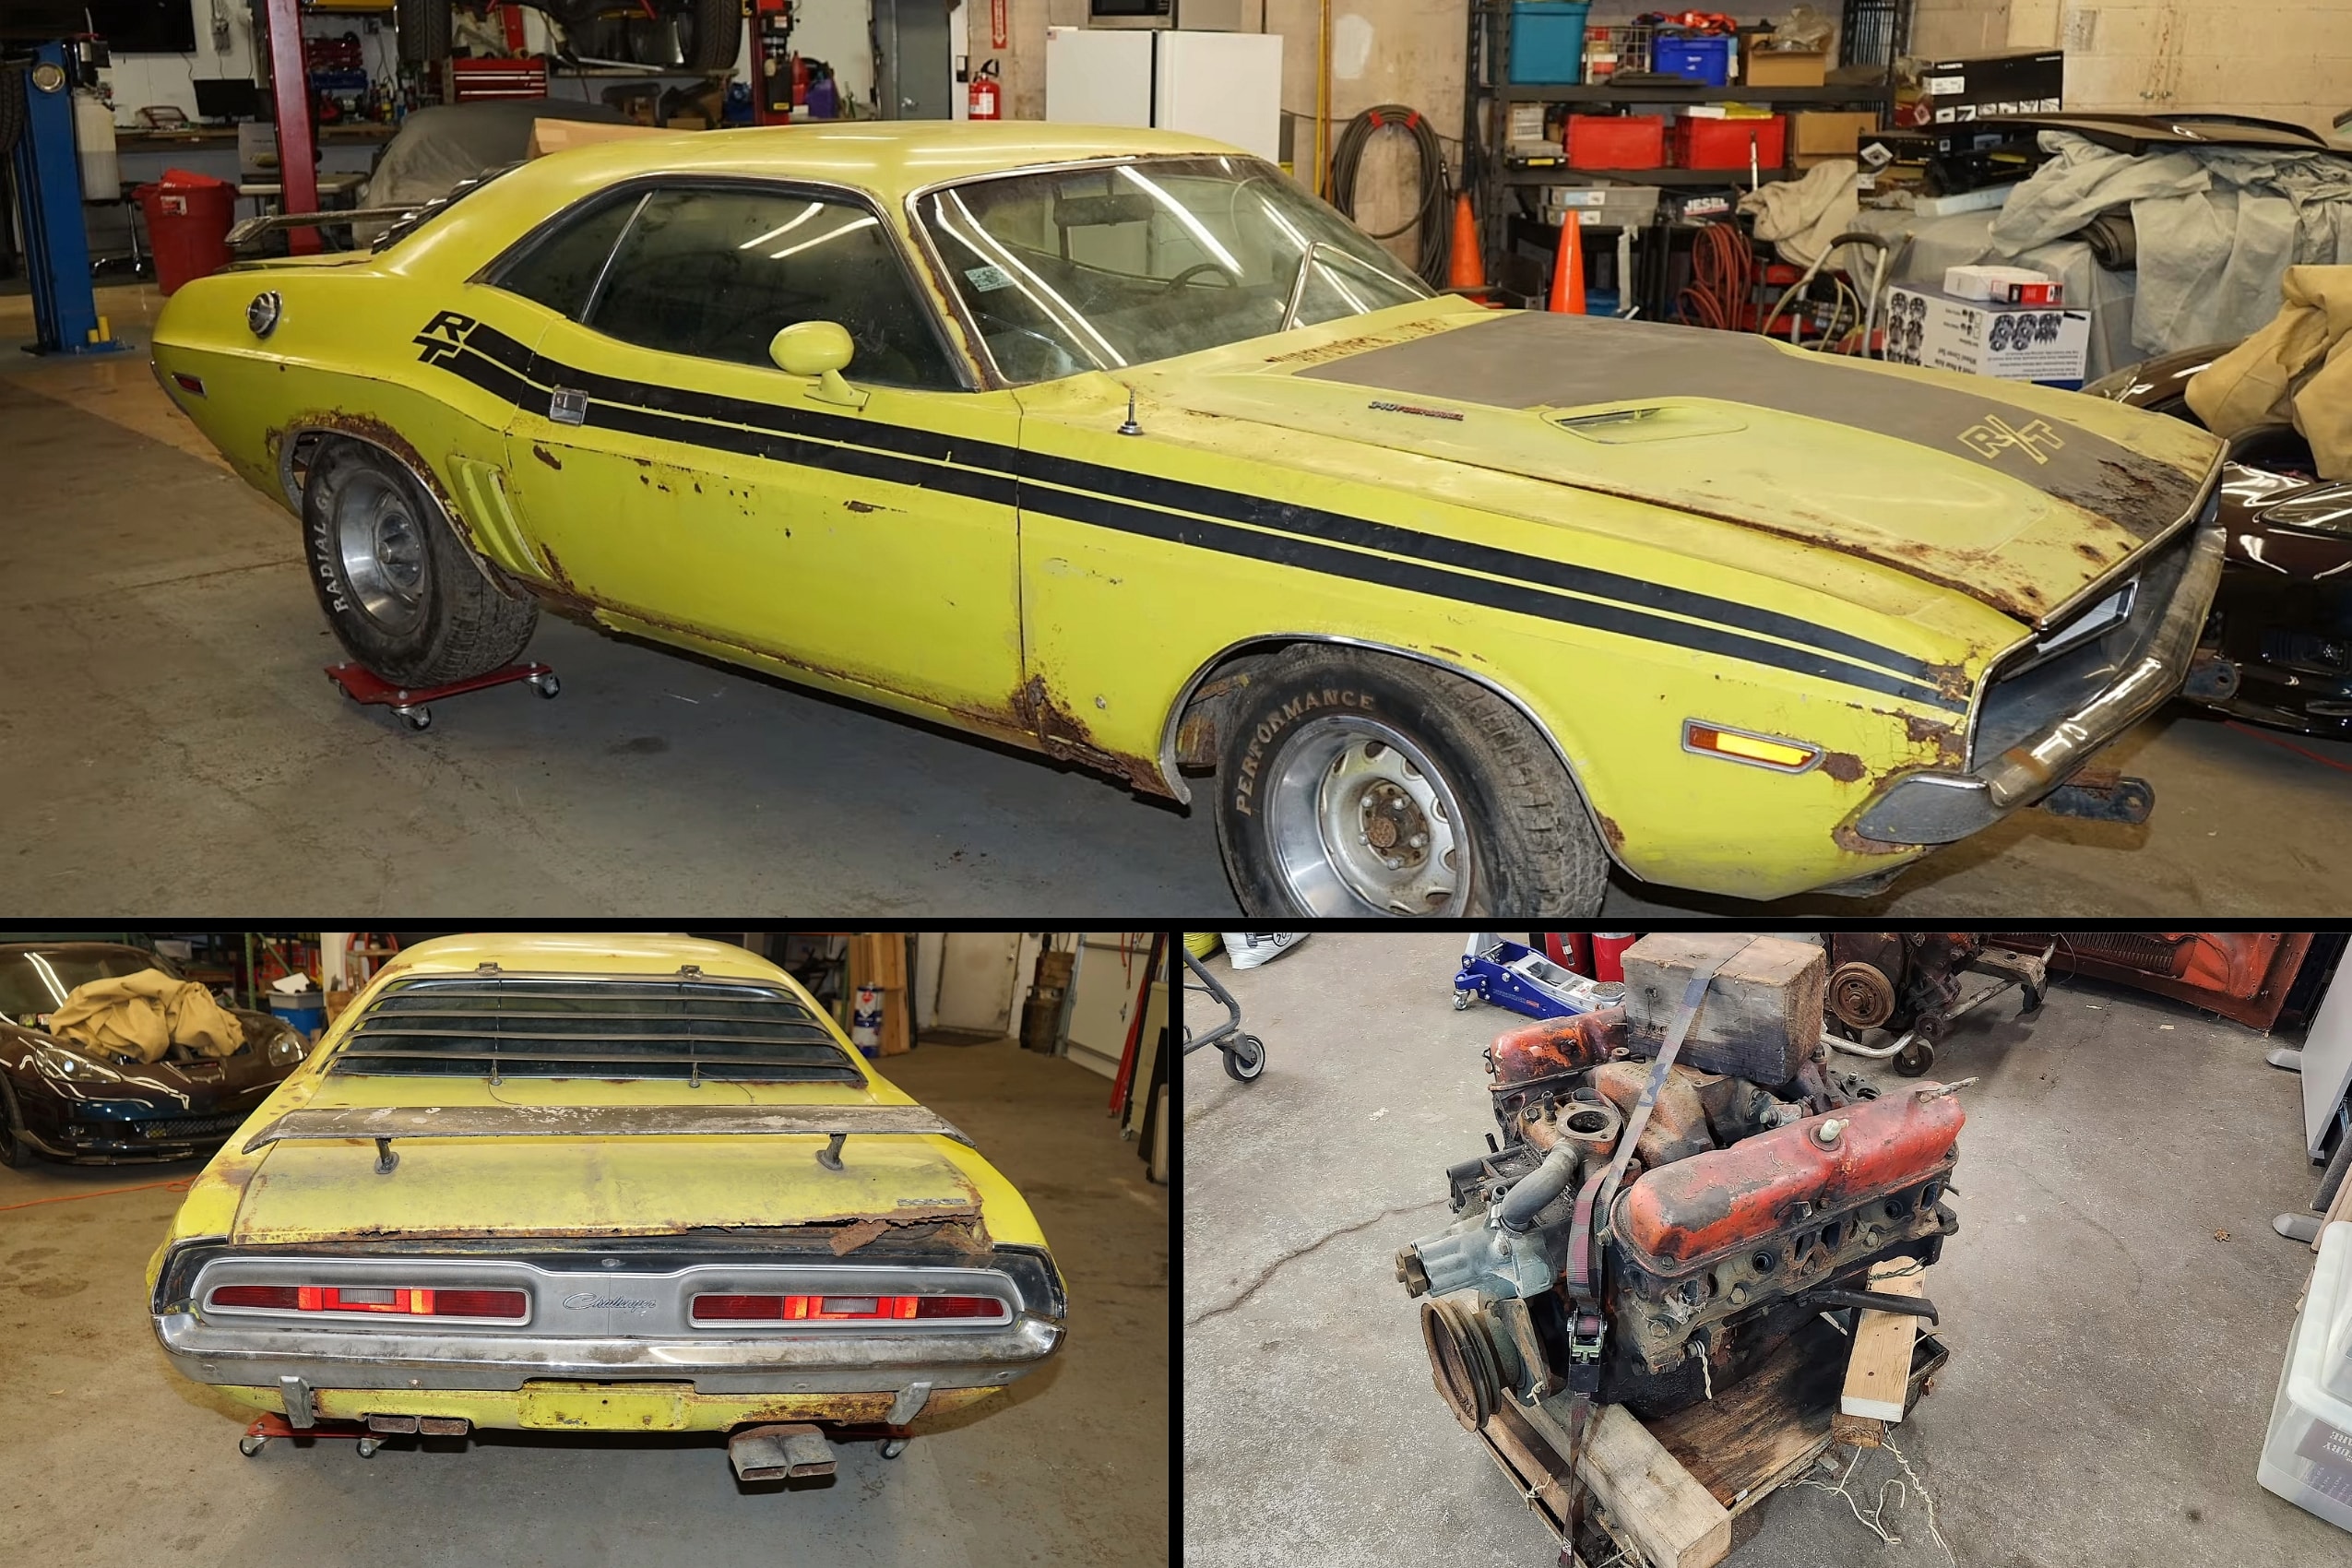 1971 Dodge Challenger R/T Found in a Backyard Comes With Two Engines,  Quirky Features - autoevolution